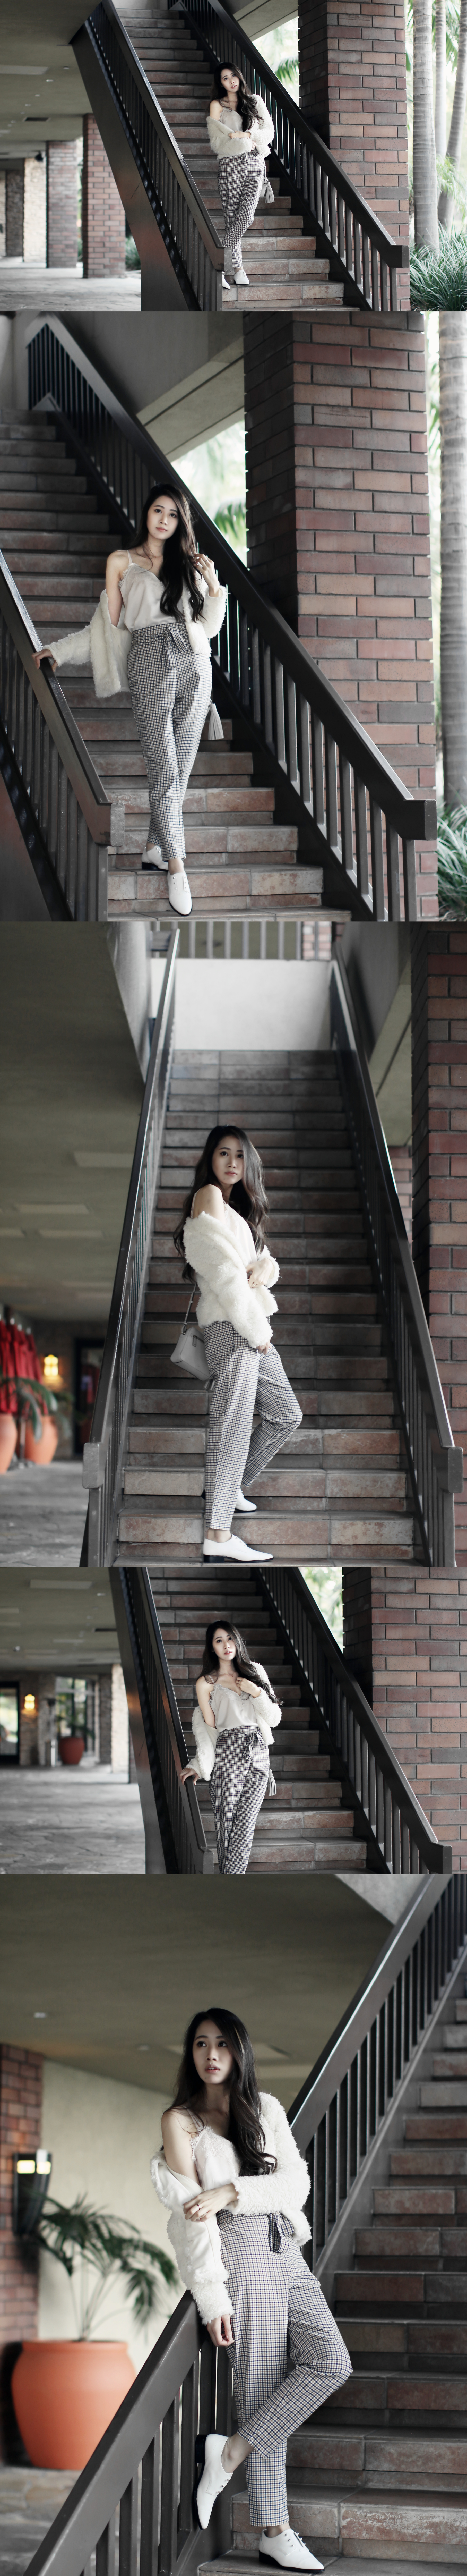 3-ootd-fashion-style-outfitoftheday-wiwt-hm-globetrotter-lifewelltravelled-travelersnotebook-shearling-faux-teddycoat-lookbook-itselizabethtran-clothestoyouuu-down